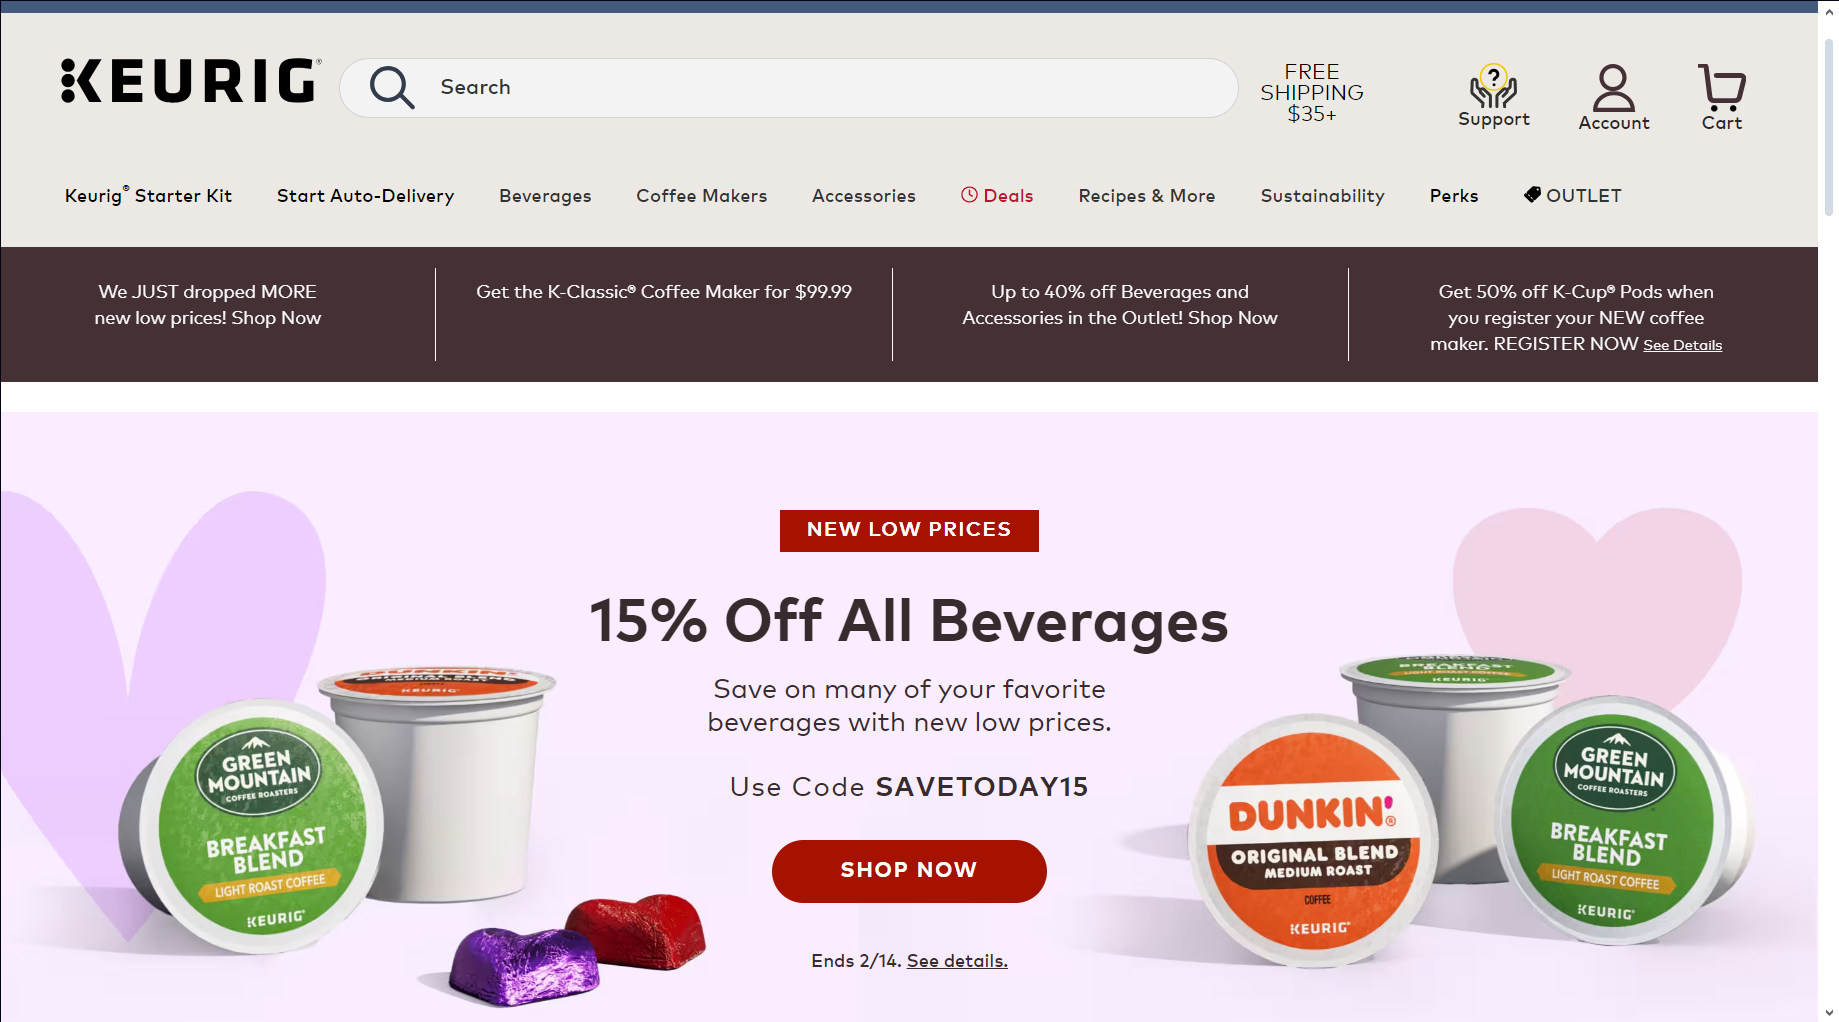 Visit Keurig for Awesome Valentine’s Day Deals